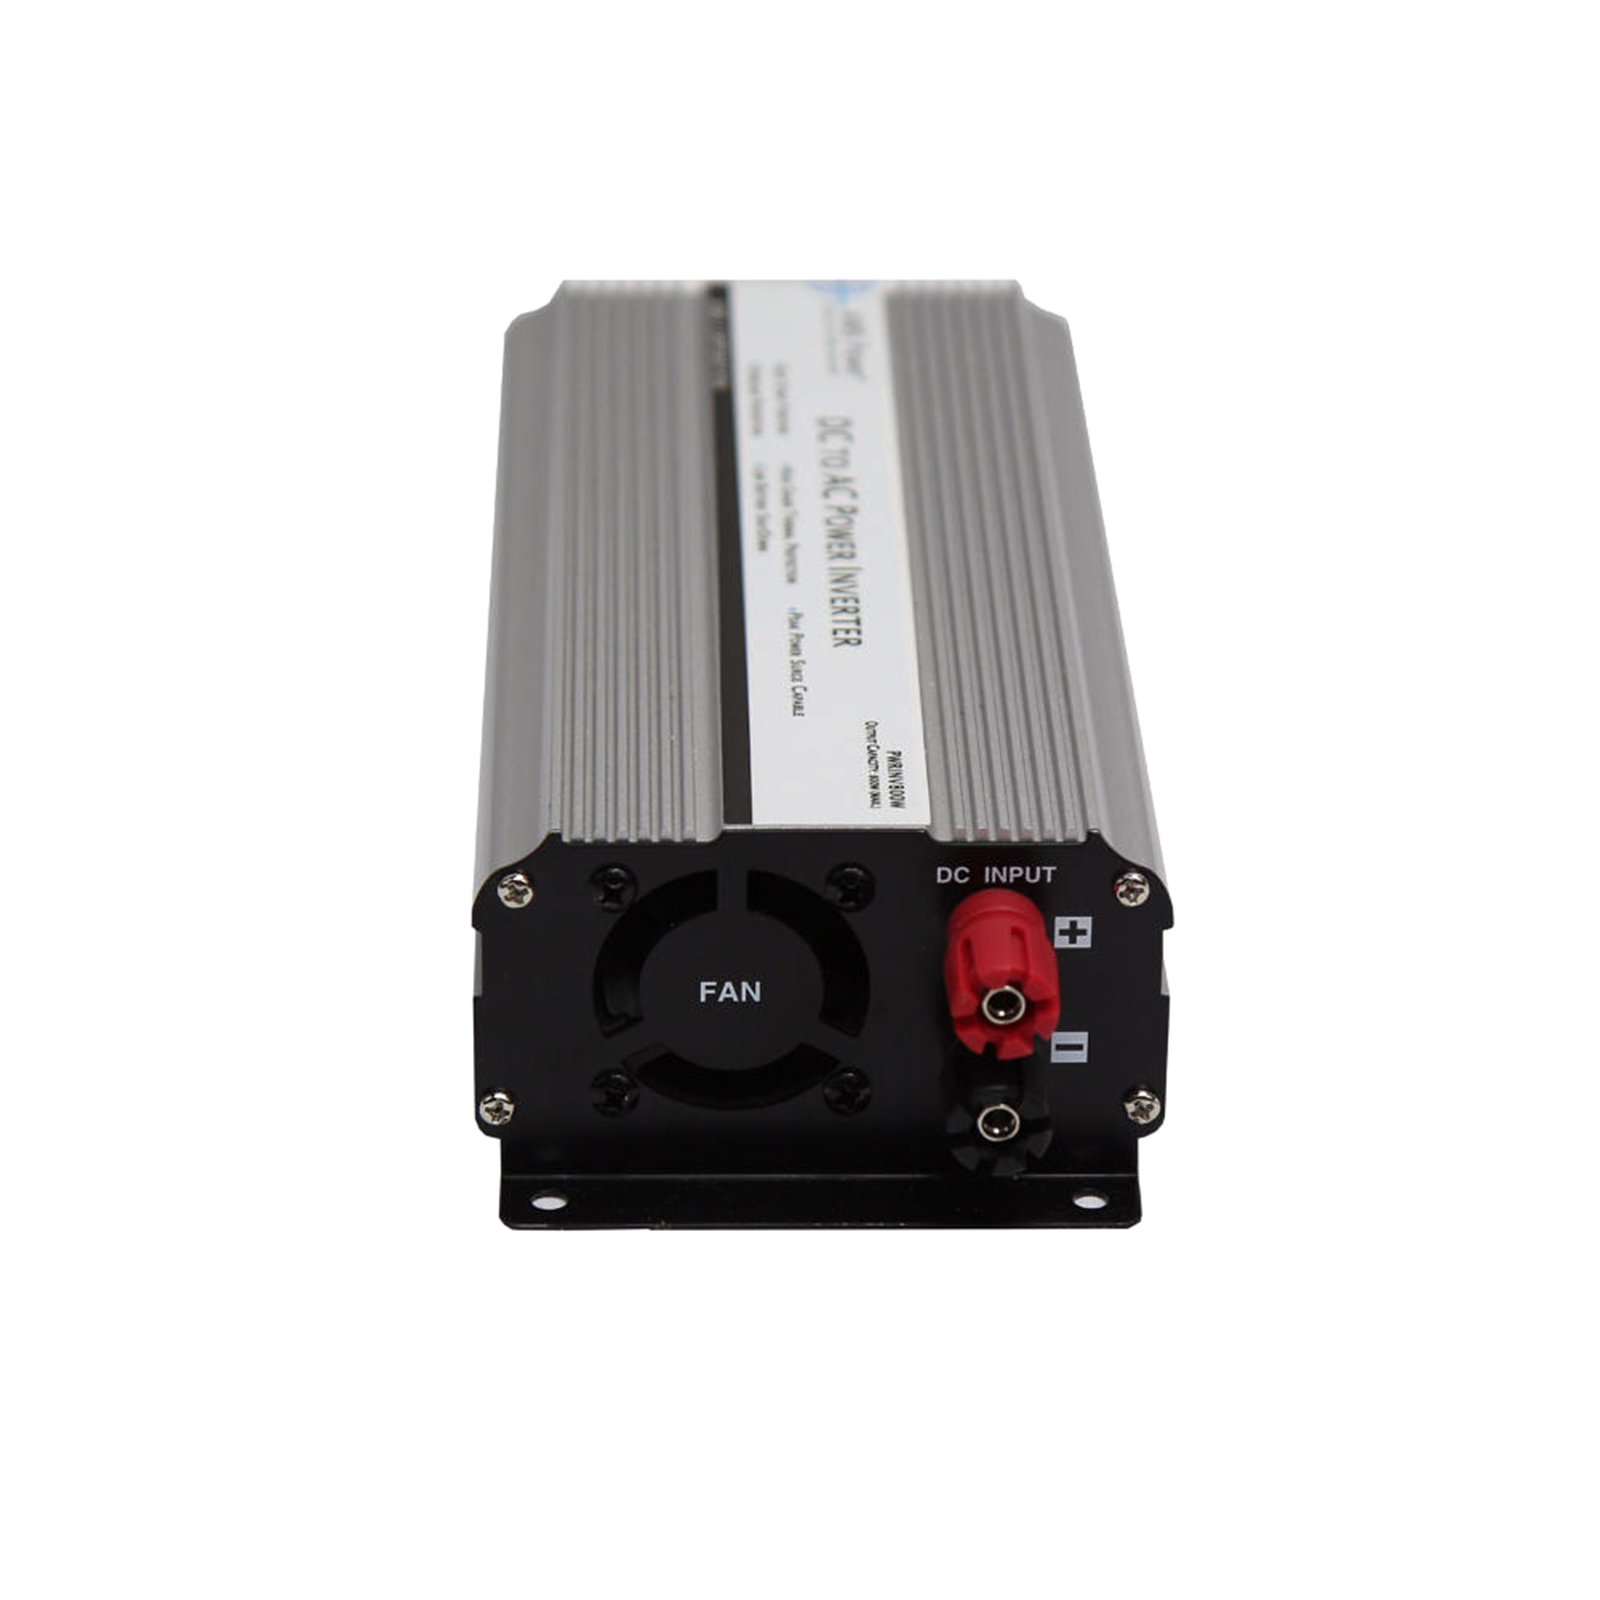 AIMS Power 800W Modified Sine Wave Power Inverter